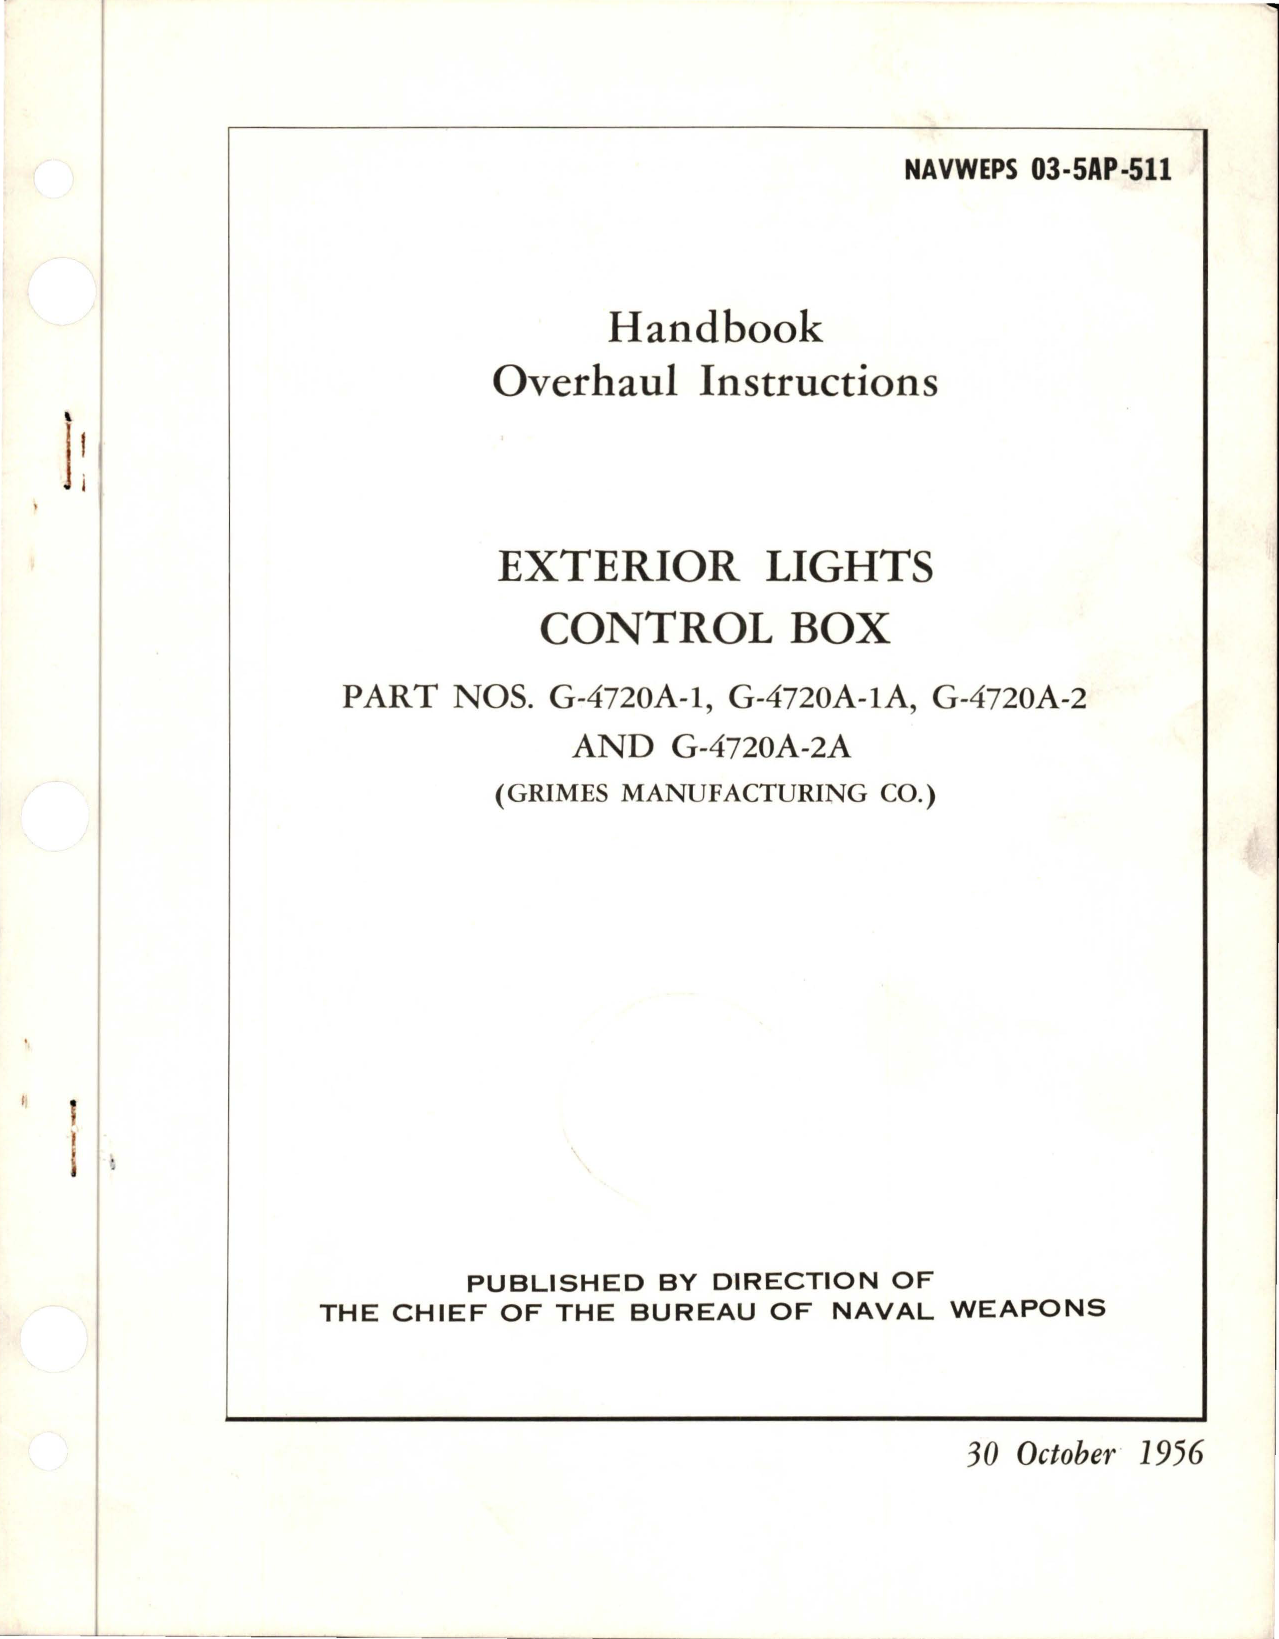 Sample page 1 from AirCorps Library document: Overhaul Instructions for Exterior Lights Control Box - Parts G-4720A-1, G-4720A-1A, G-4720A-2, and G-4720A-2A